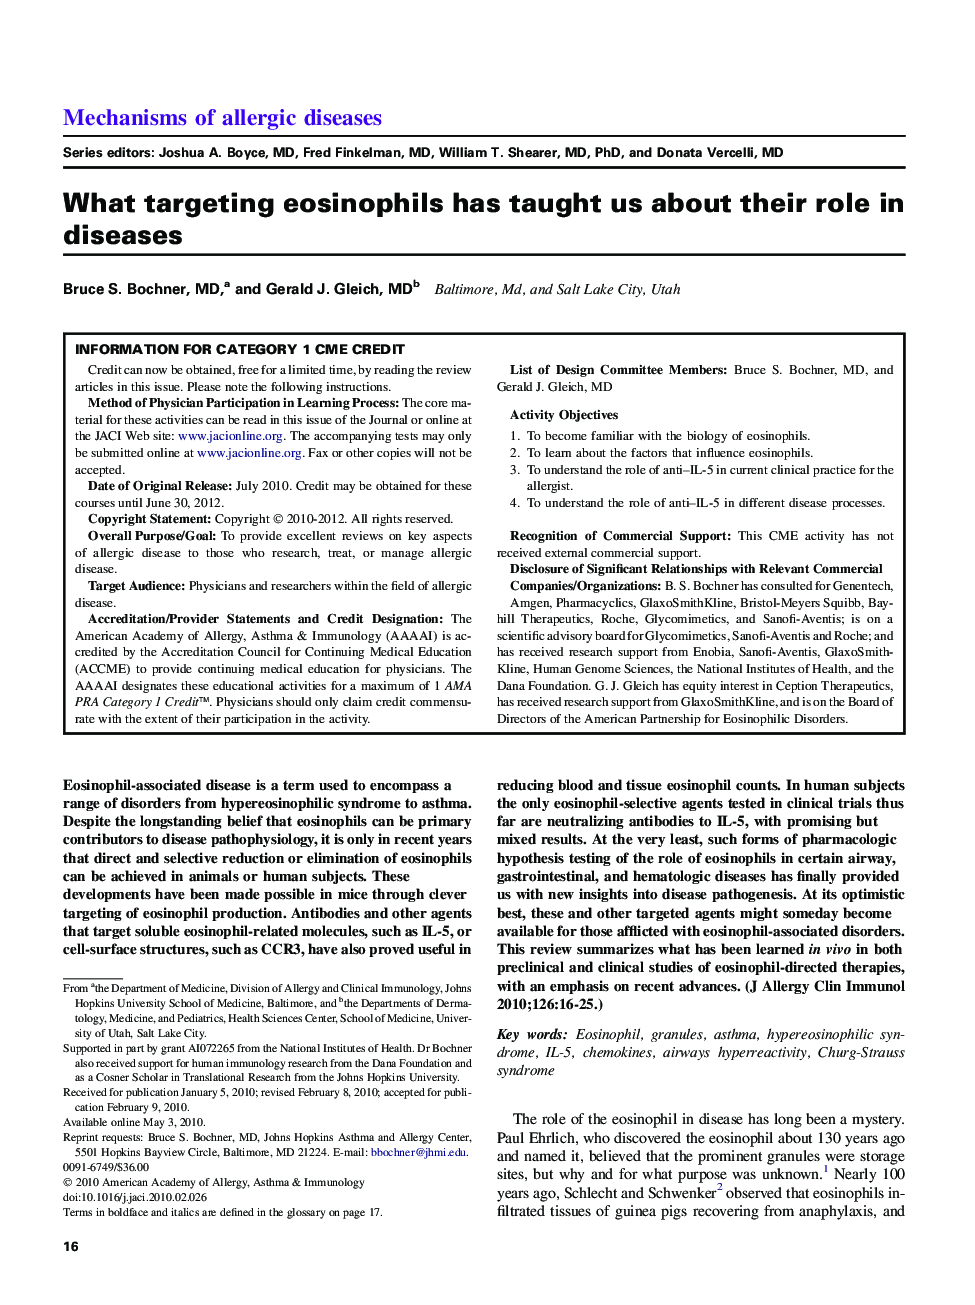 What targeting eosinophils has taught us about their role in diseases 